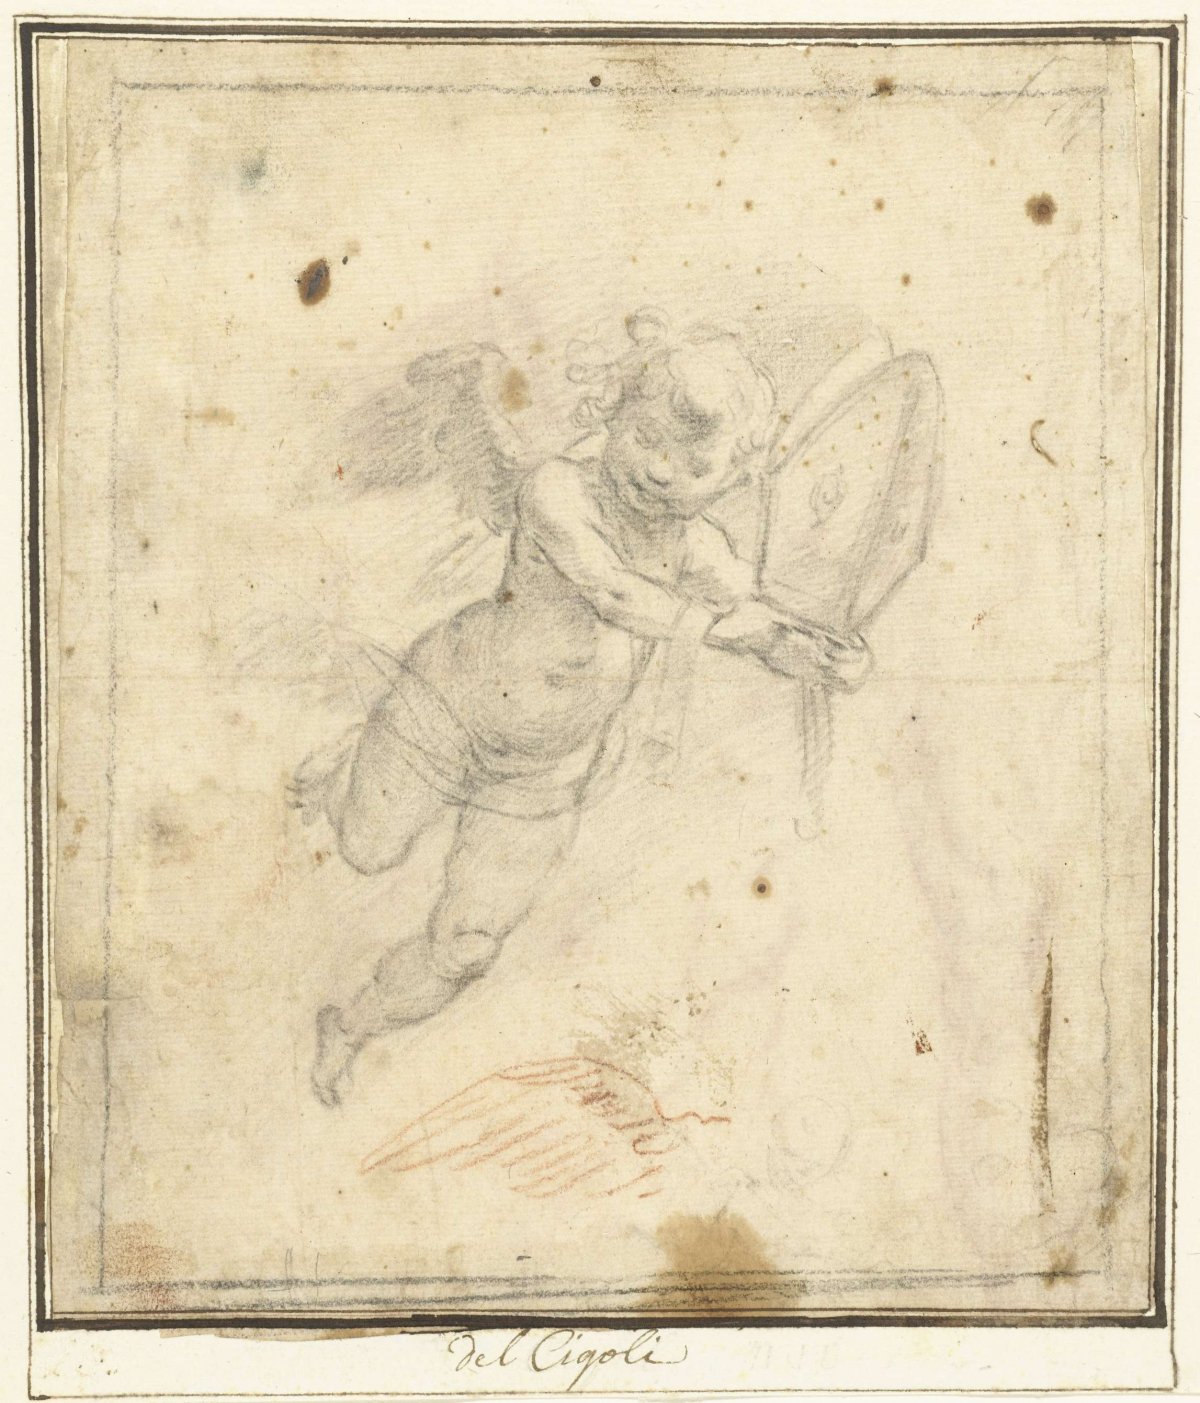 Floating angel and a wing, Bernardino Poccetti, 1558 - 1612